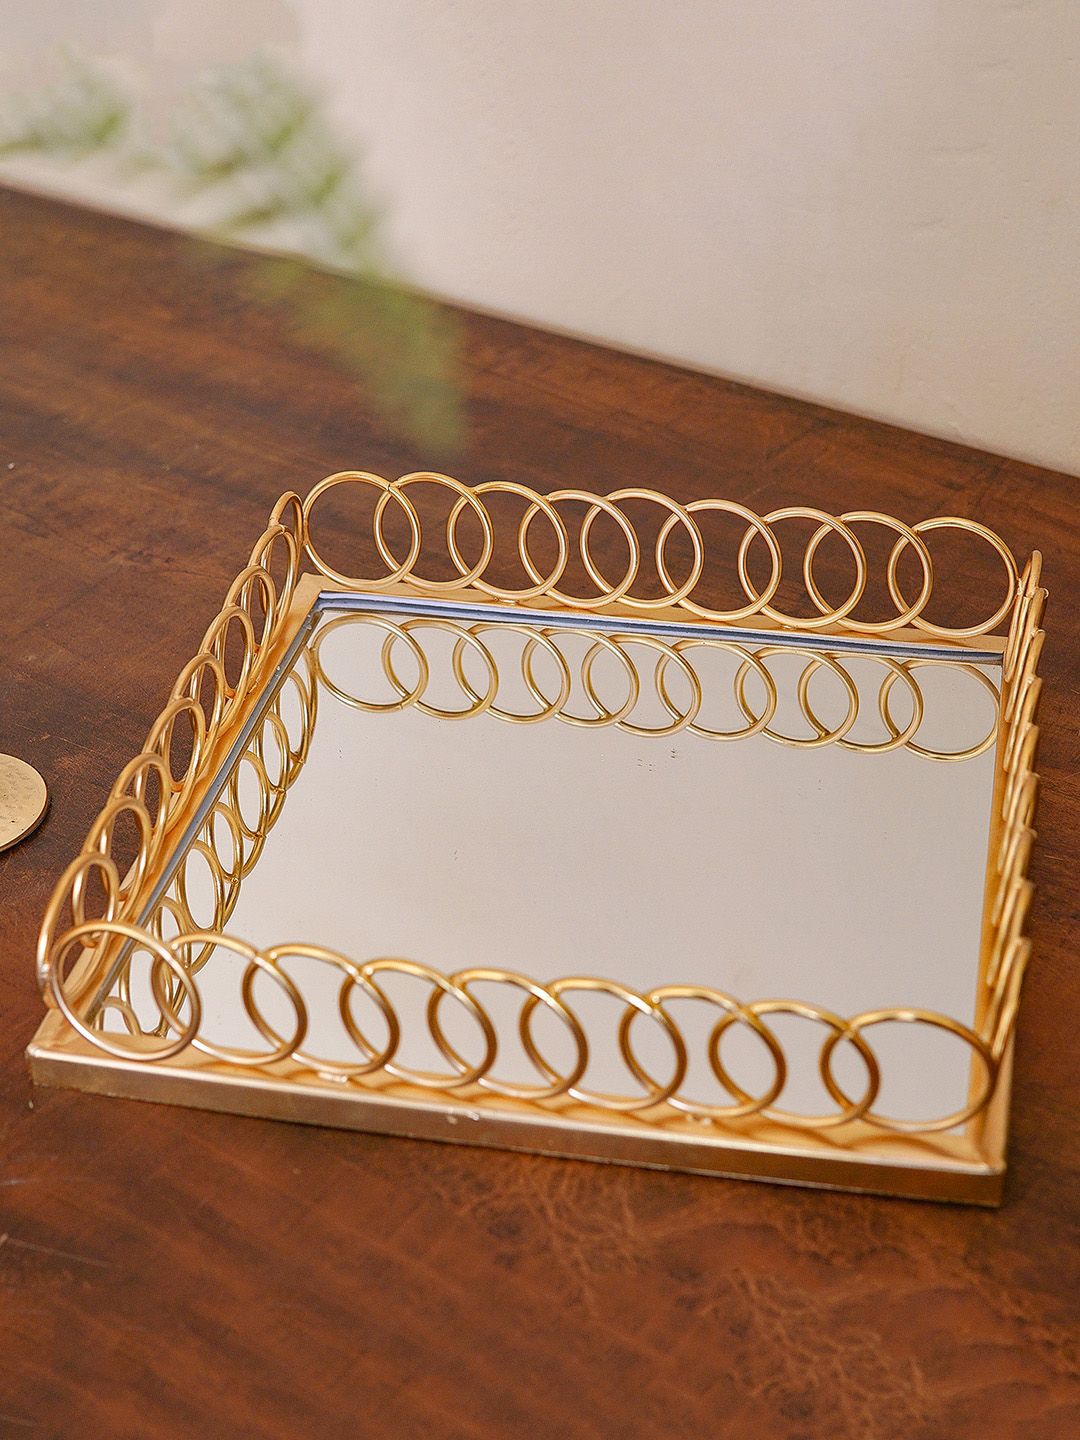 StatueStudio Gold-Toned Serving Tray With Mirror Price in India